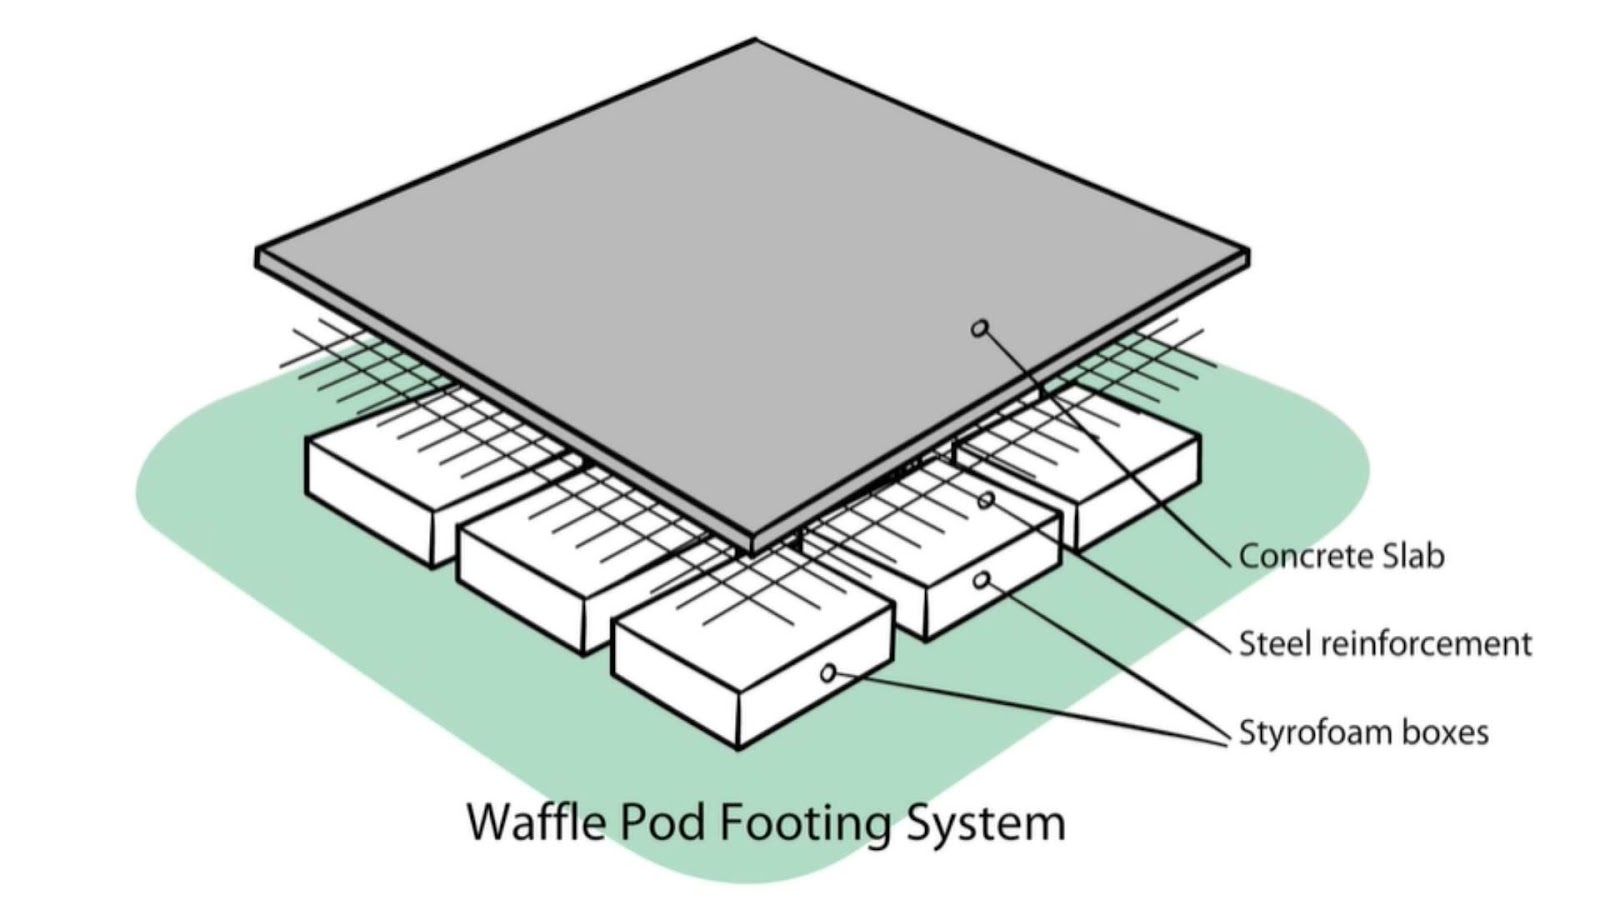 How to construct the waffle slab?